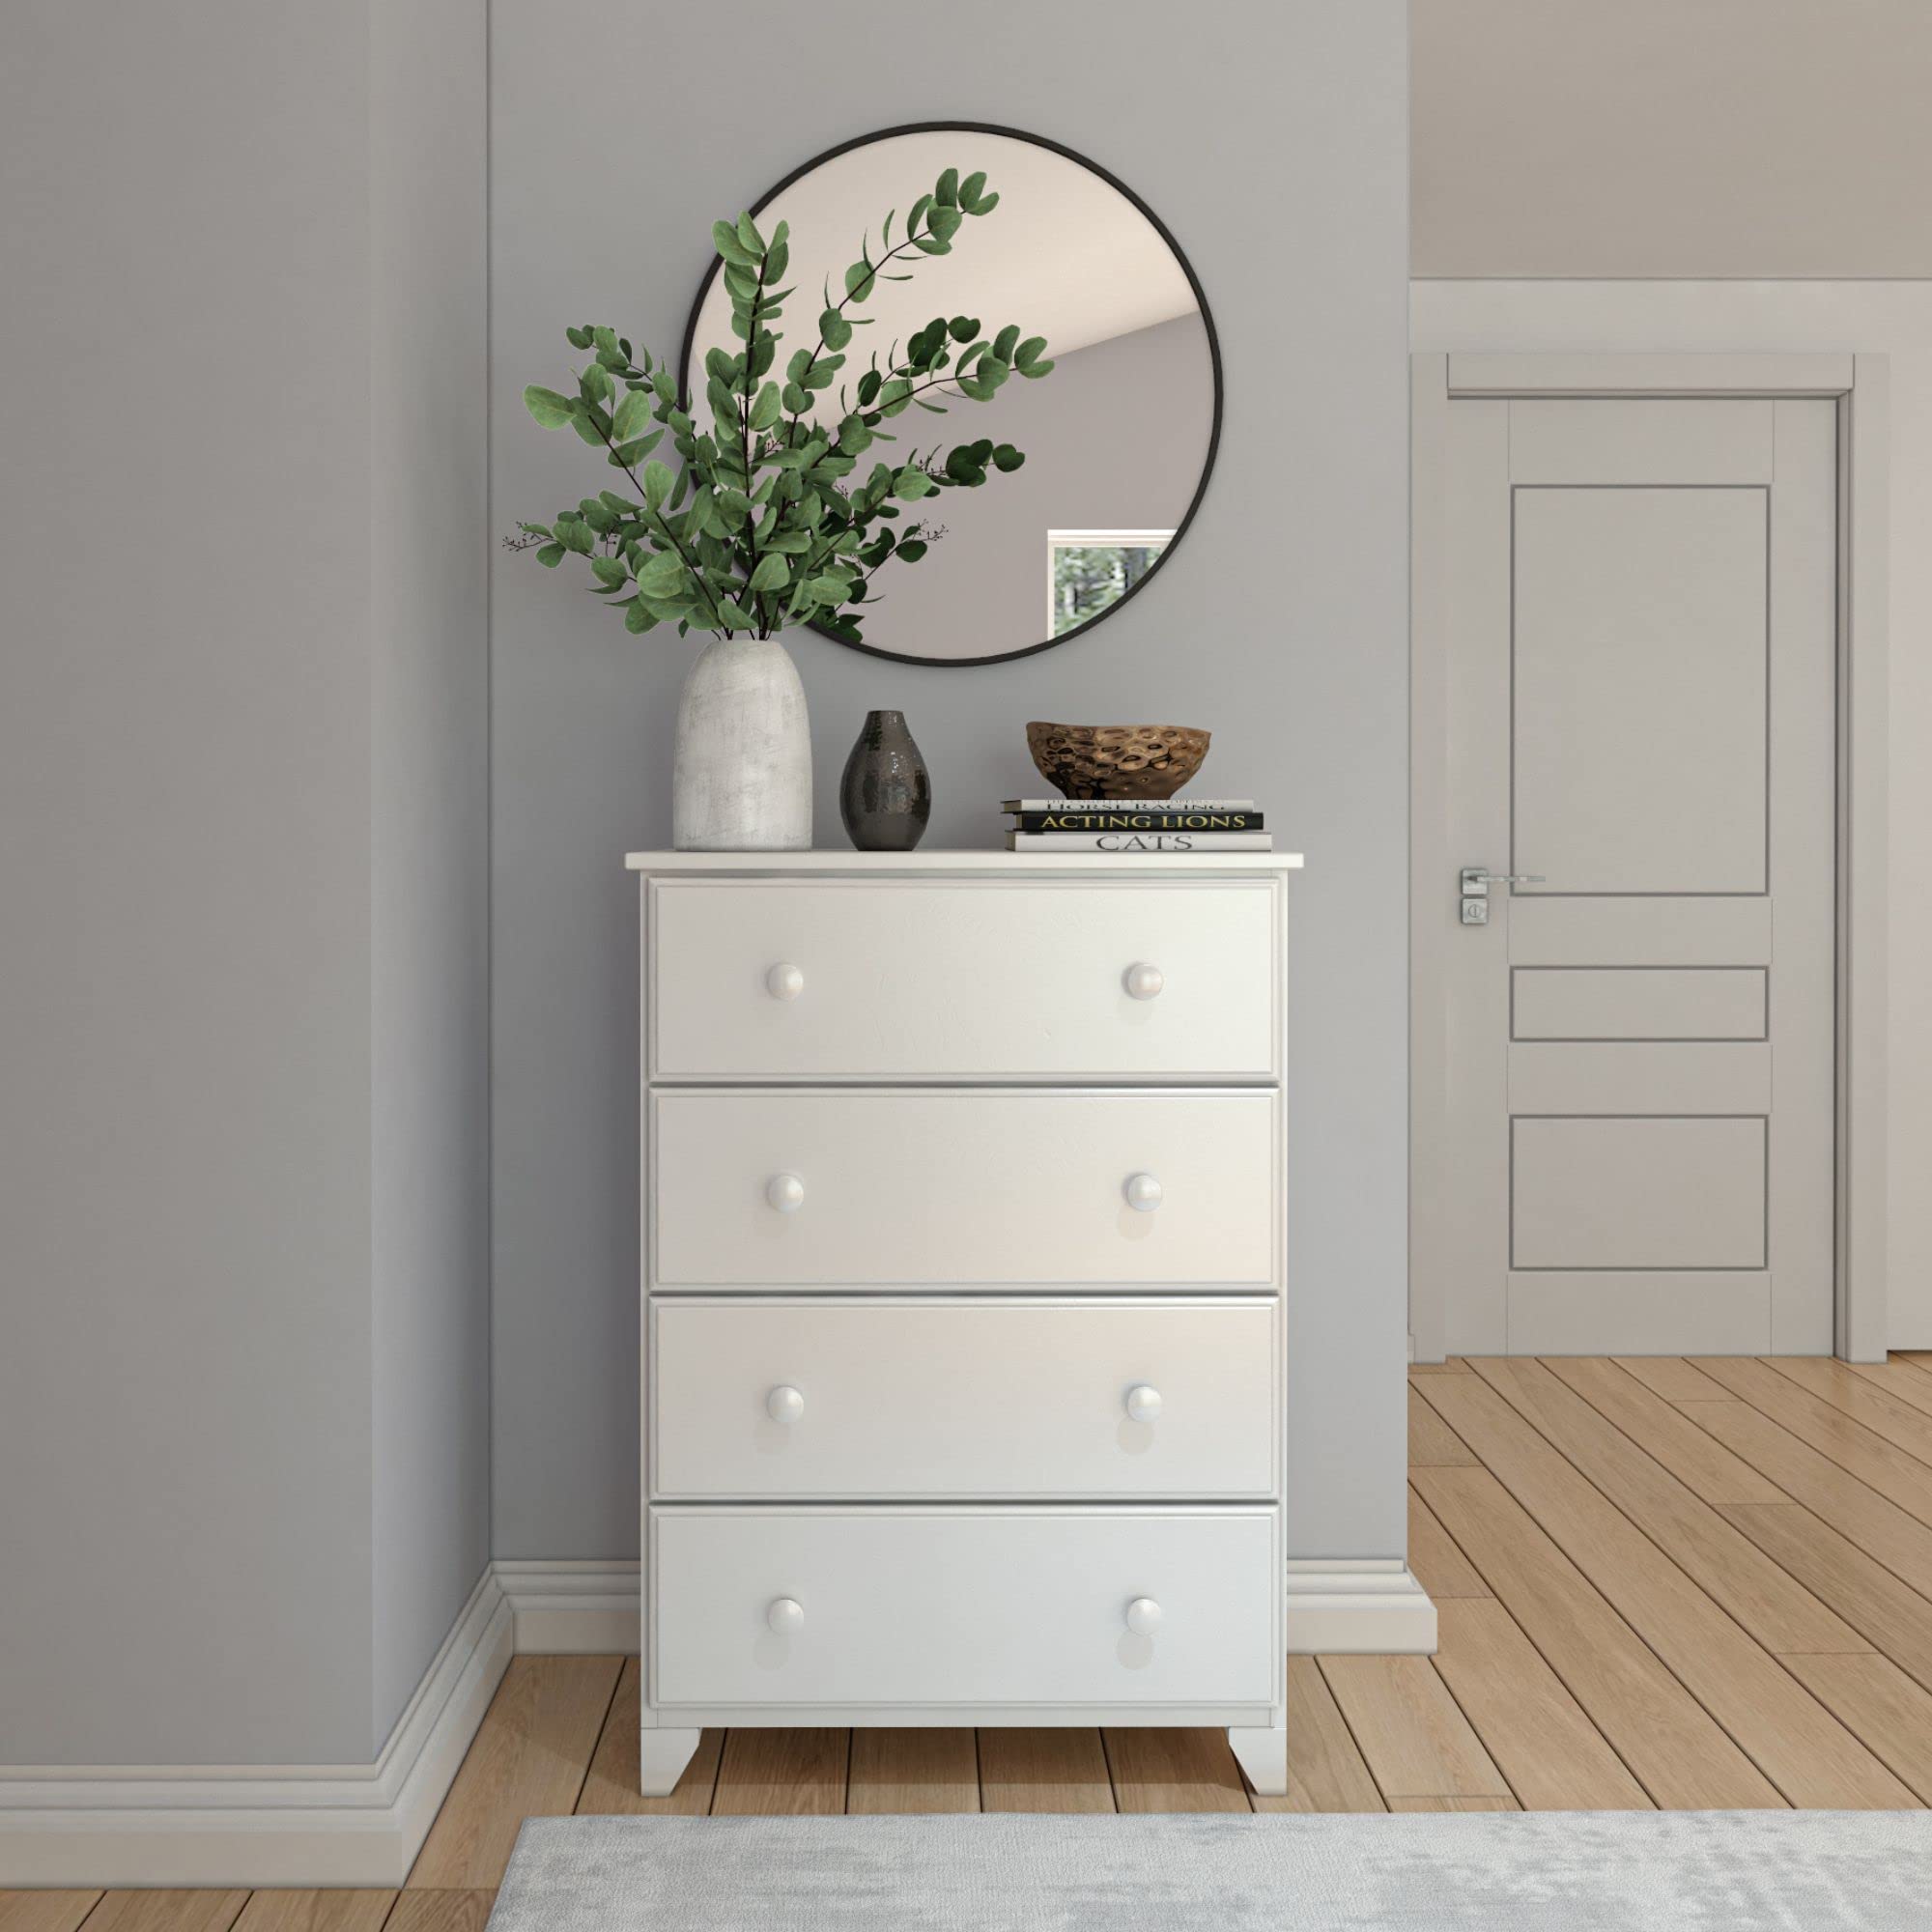 Plank+Beam classic 4-Drawer Wood Dresser, Small Dresser for Bedroom, chest of Drawers, White